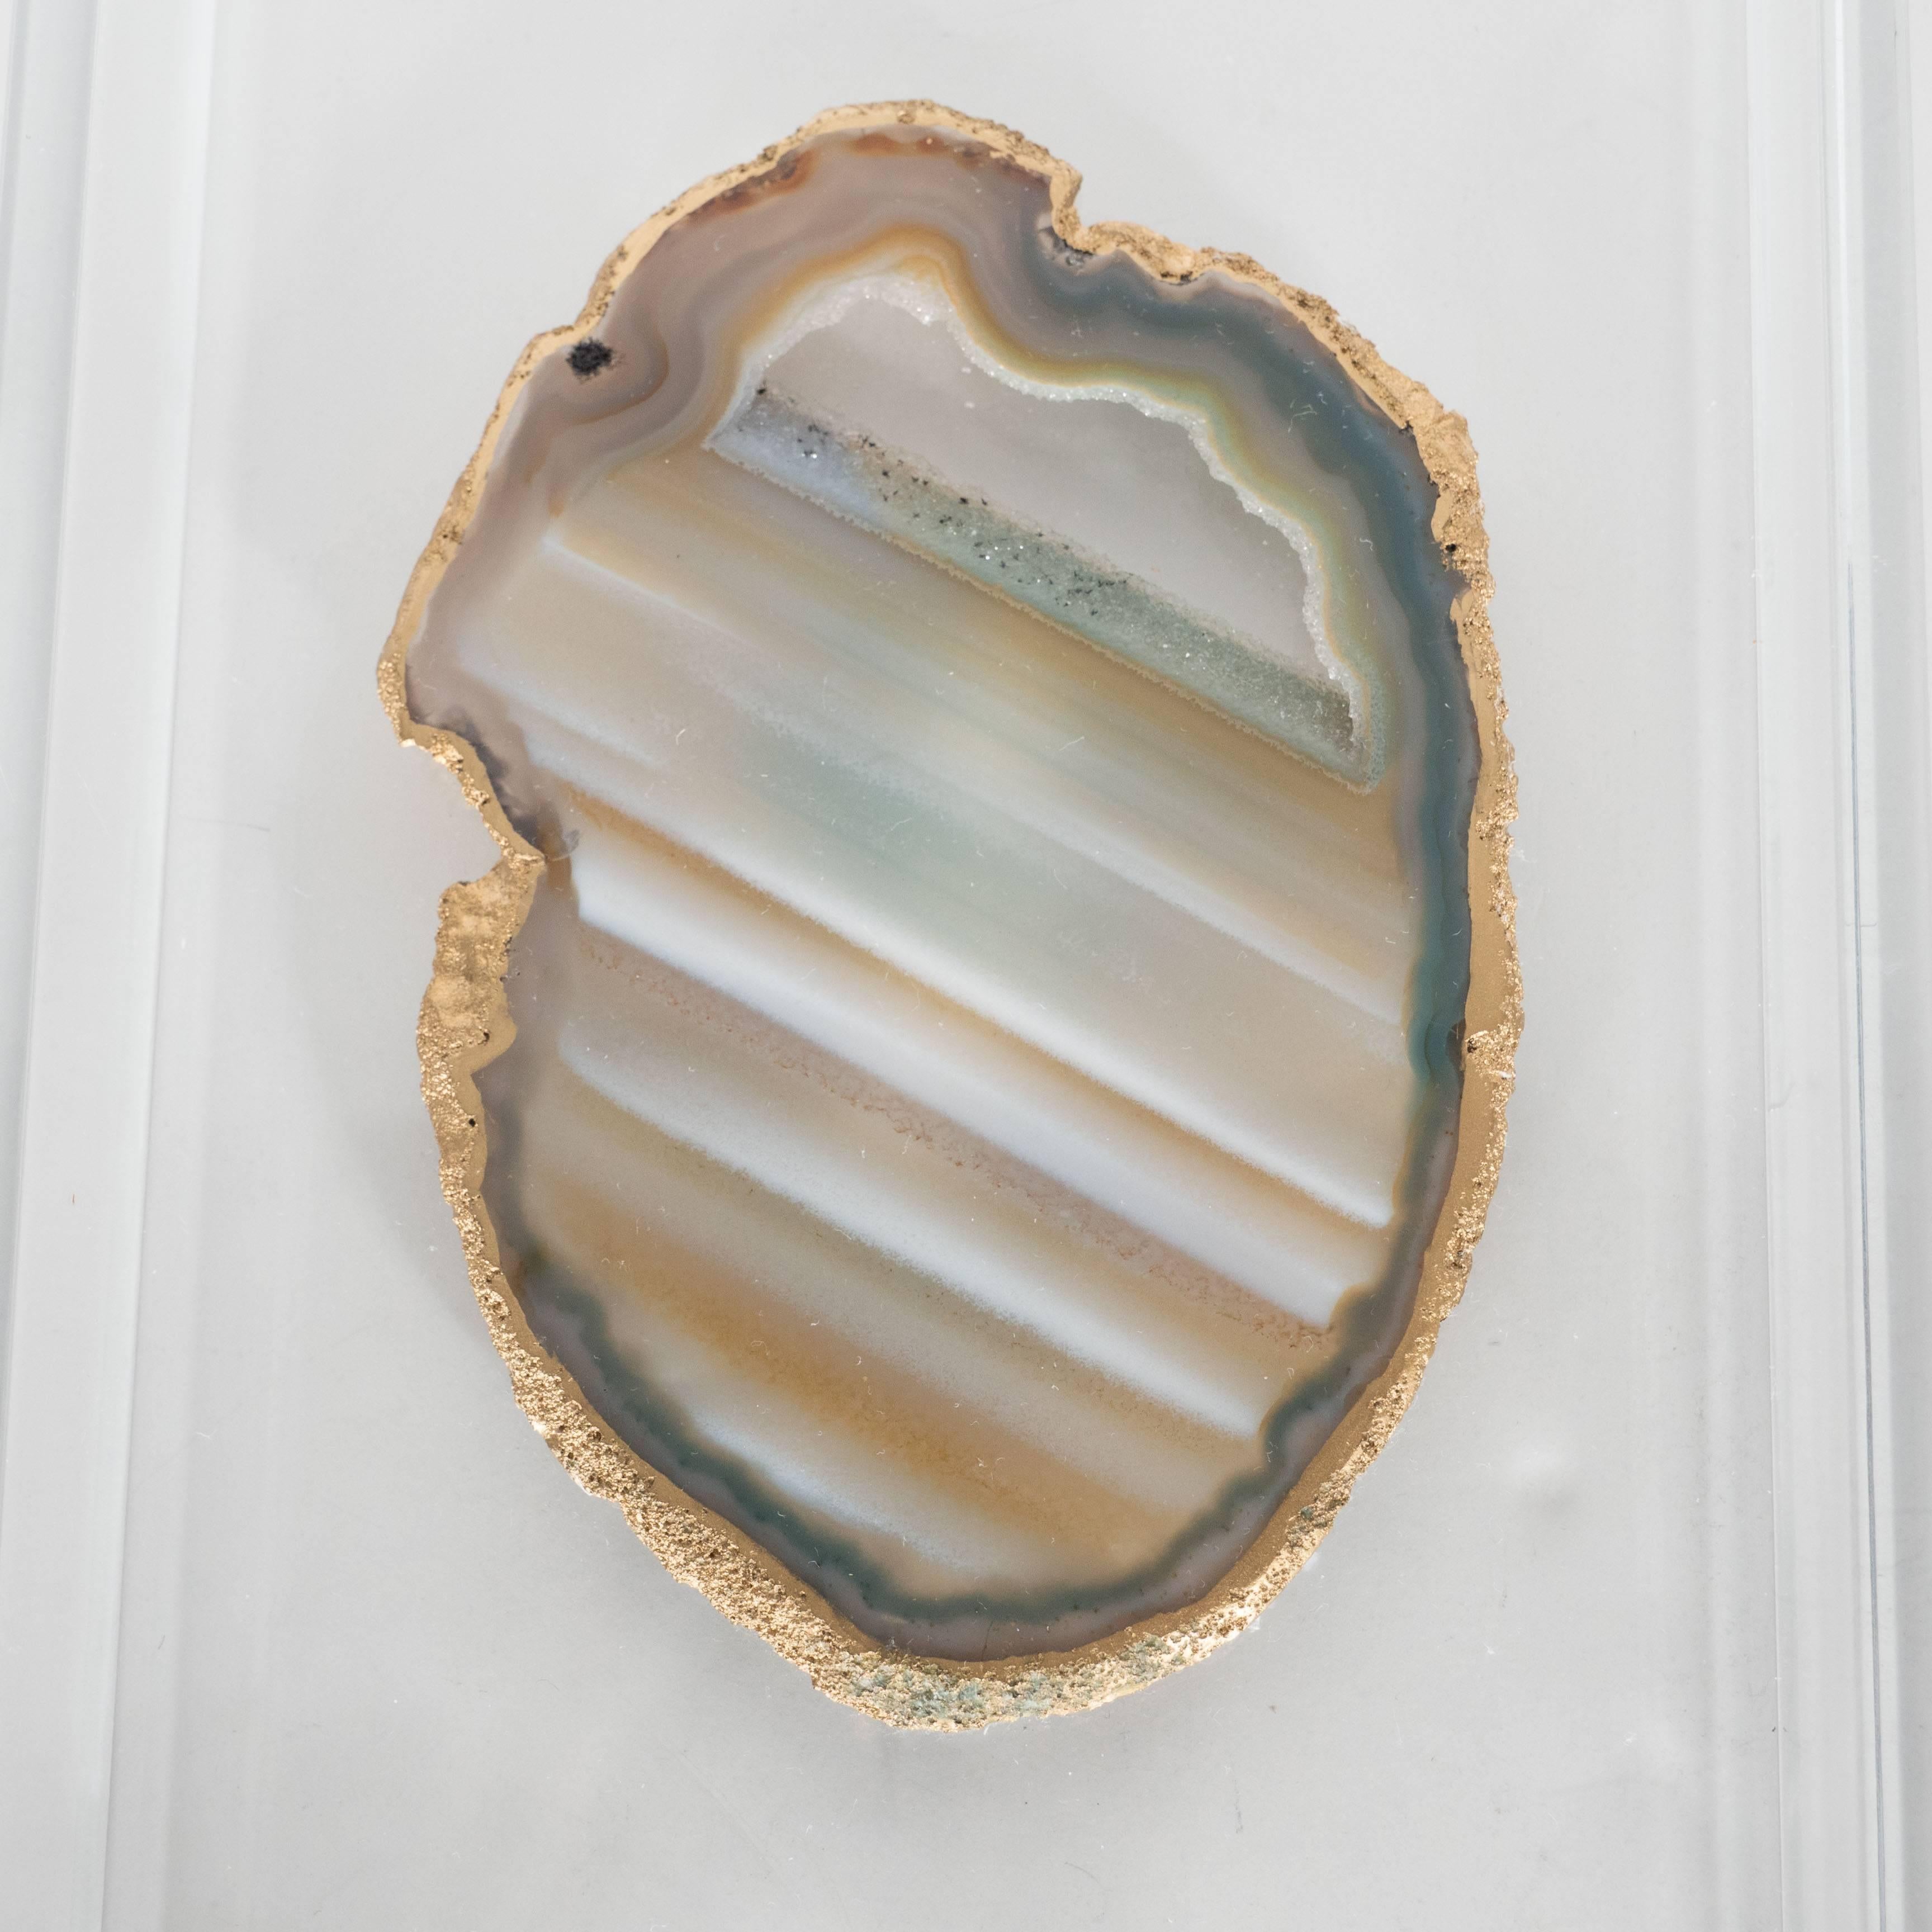 Organic Modern Modernist Organic Sliced Agate and Lucite Desk Tray or Catch All